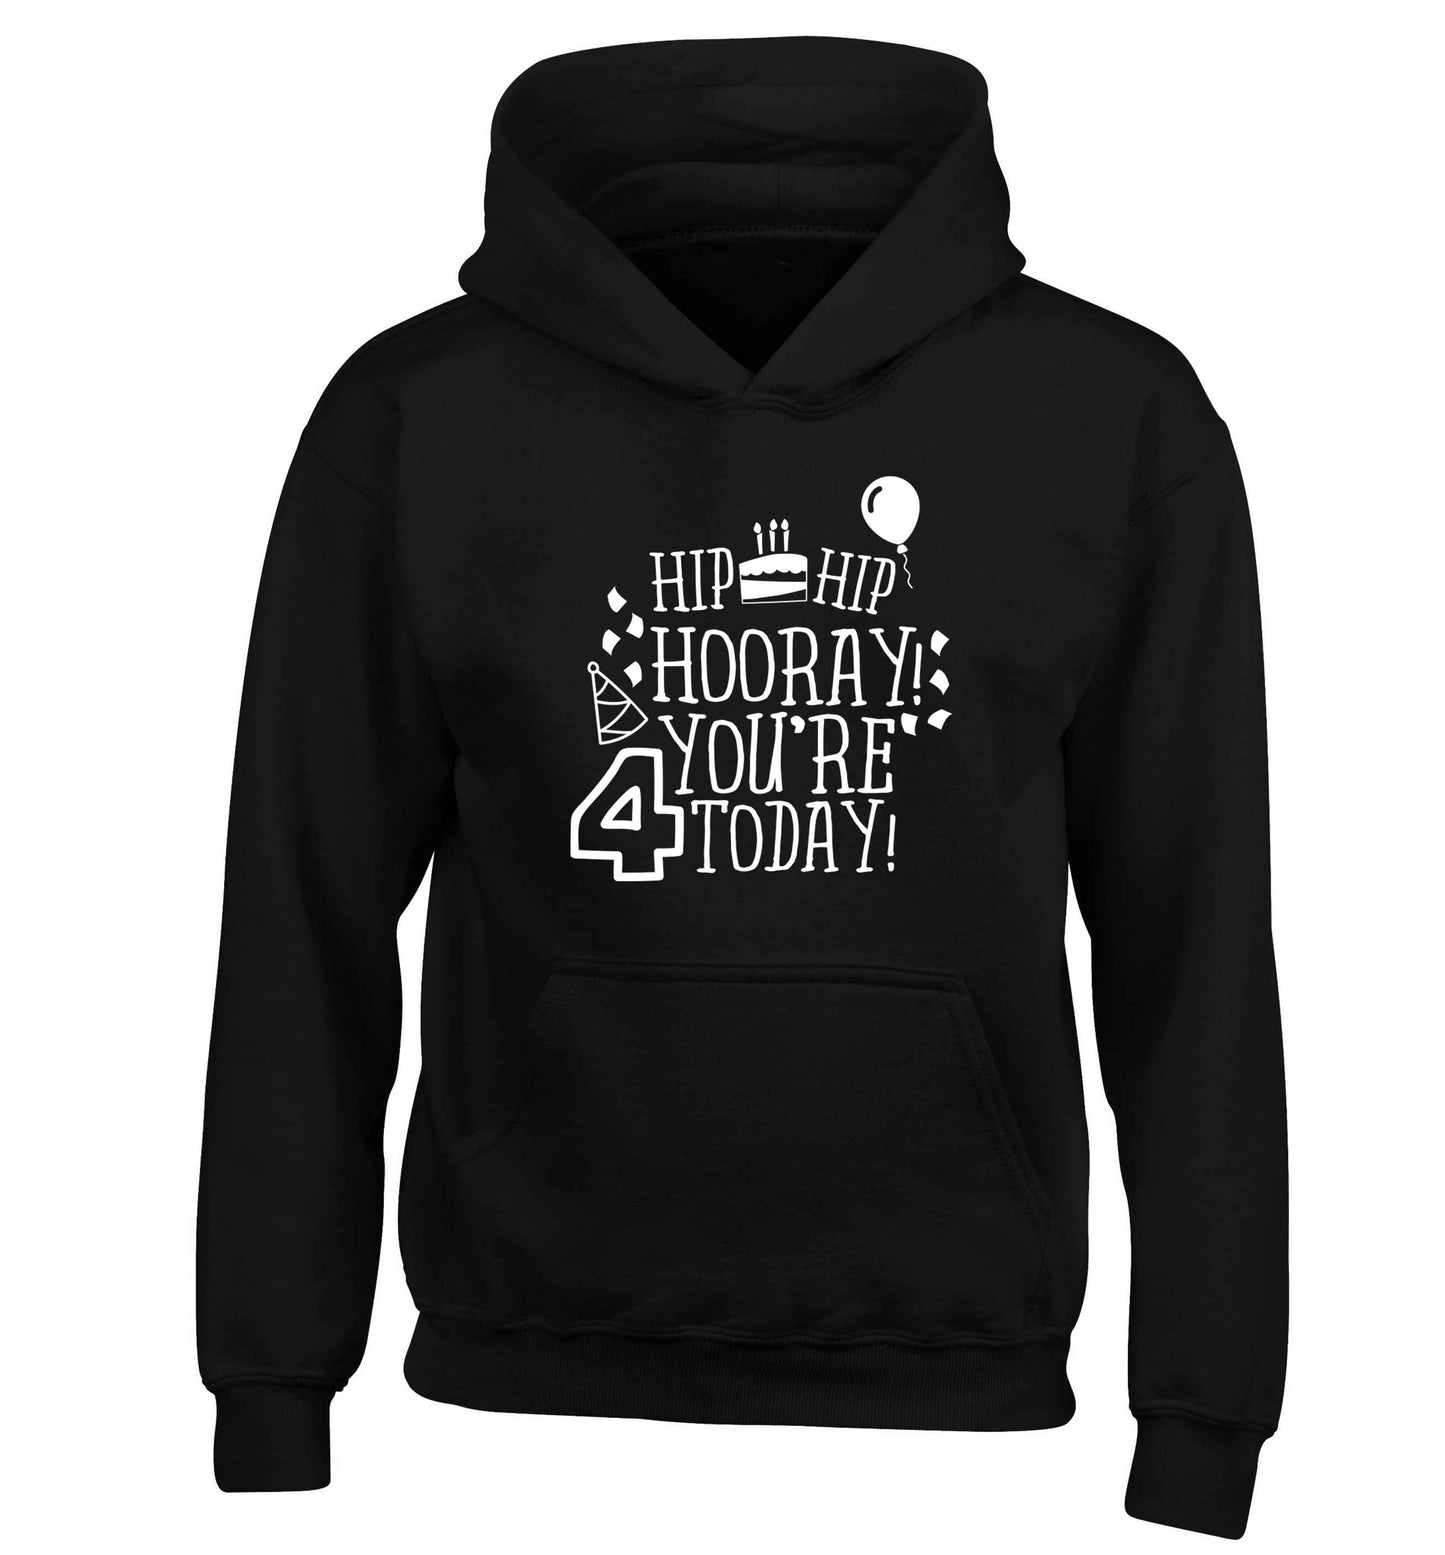 Hip hip hooray you're four today!children's black hoodie 12-13 Years